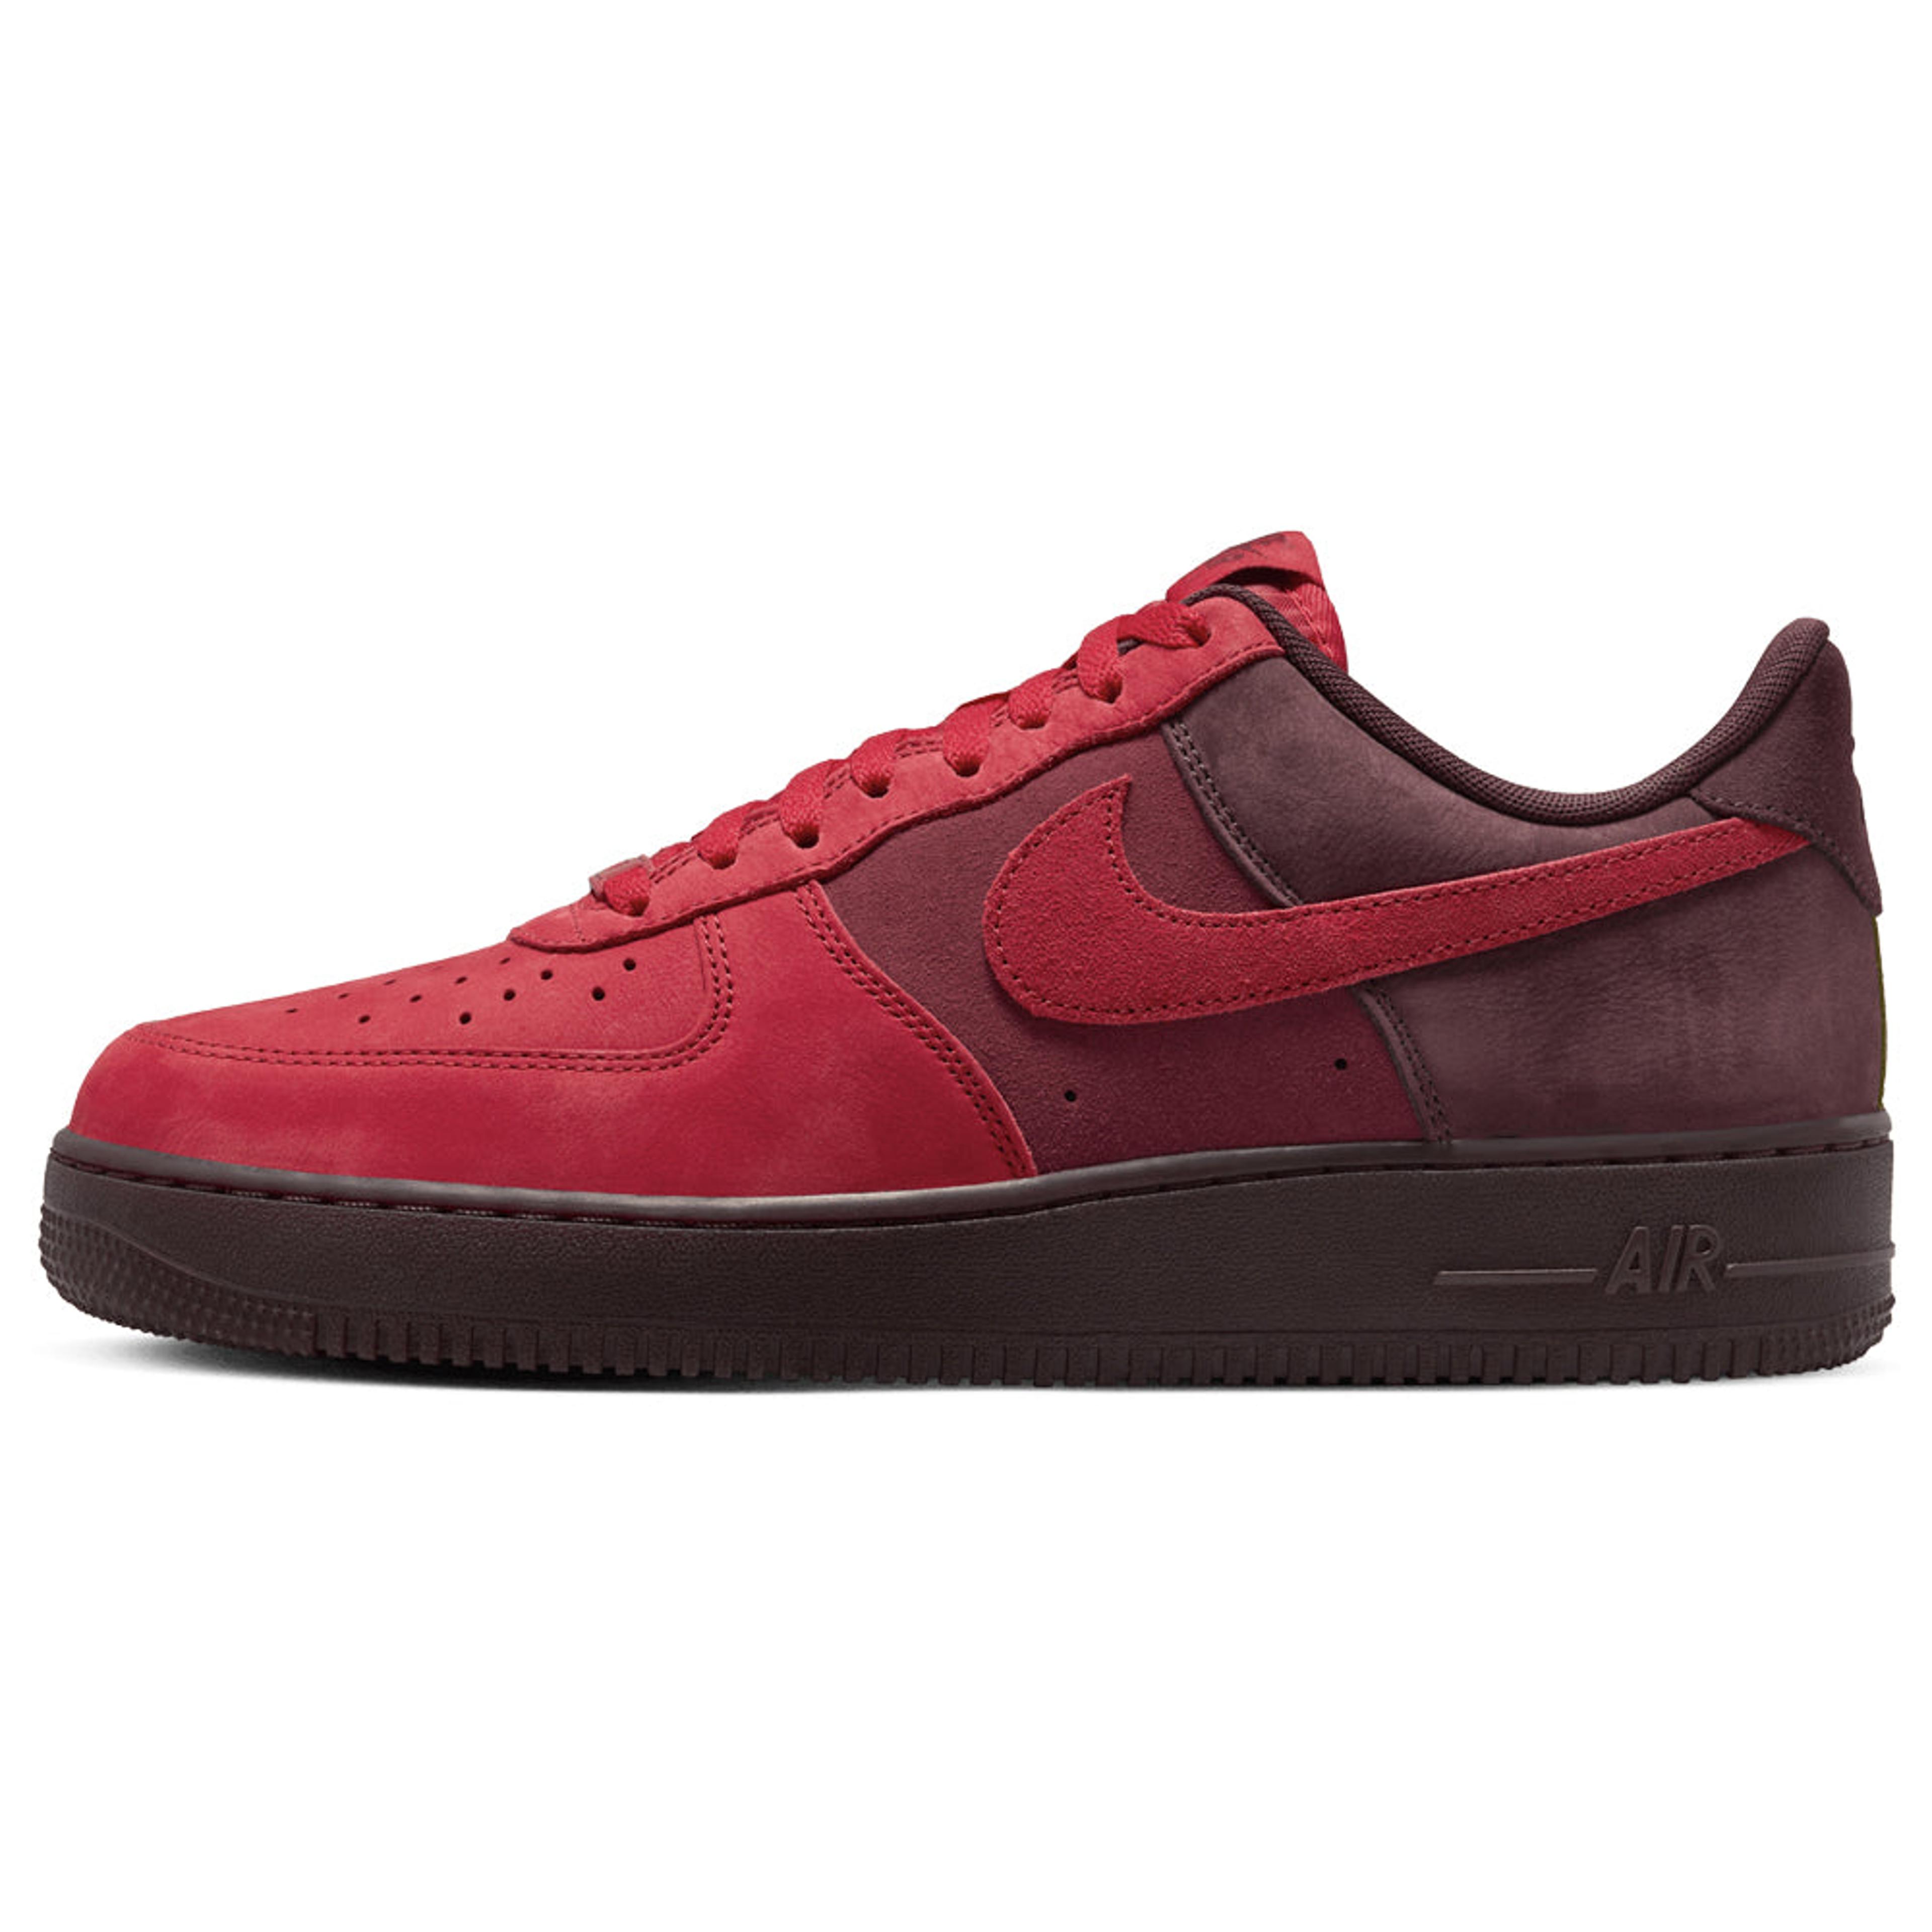 Alternate View 7 of Air Force 1 '07